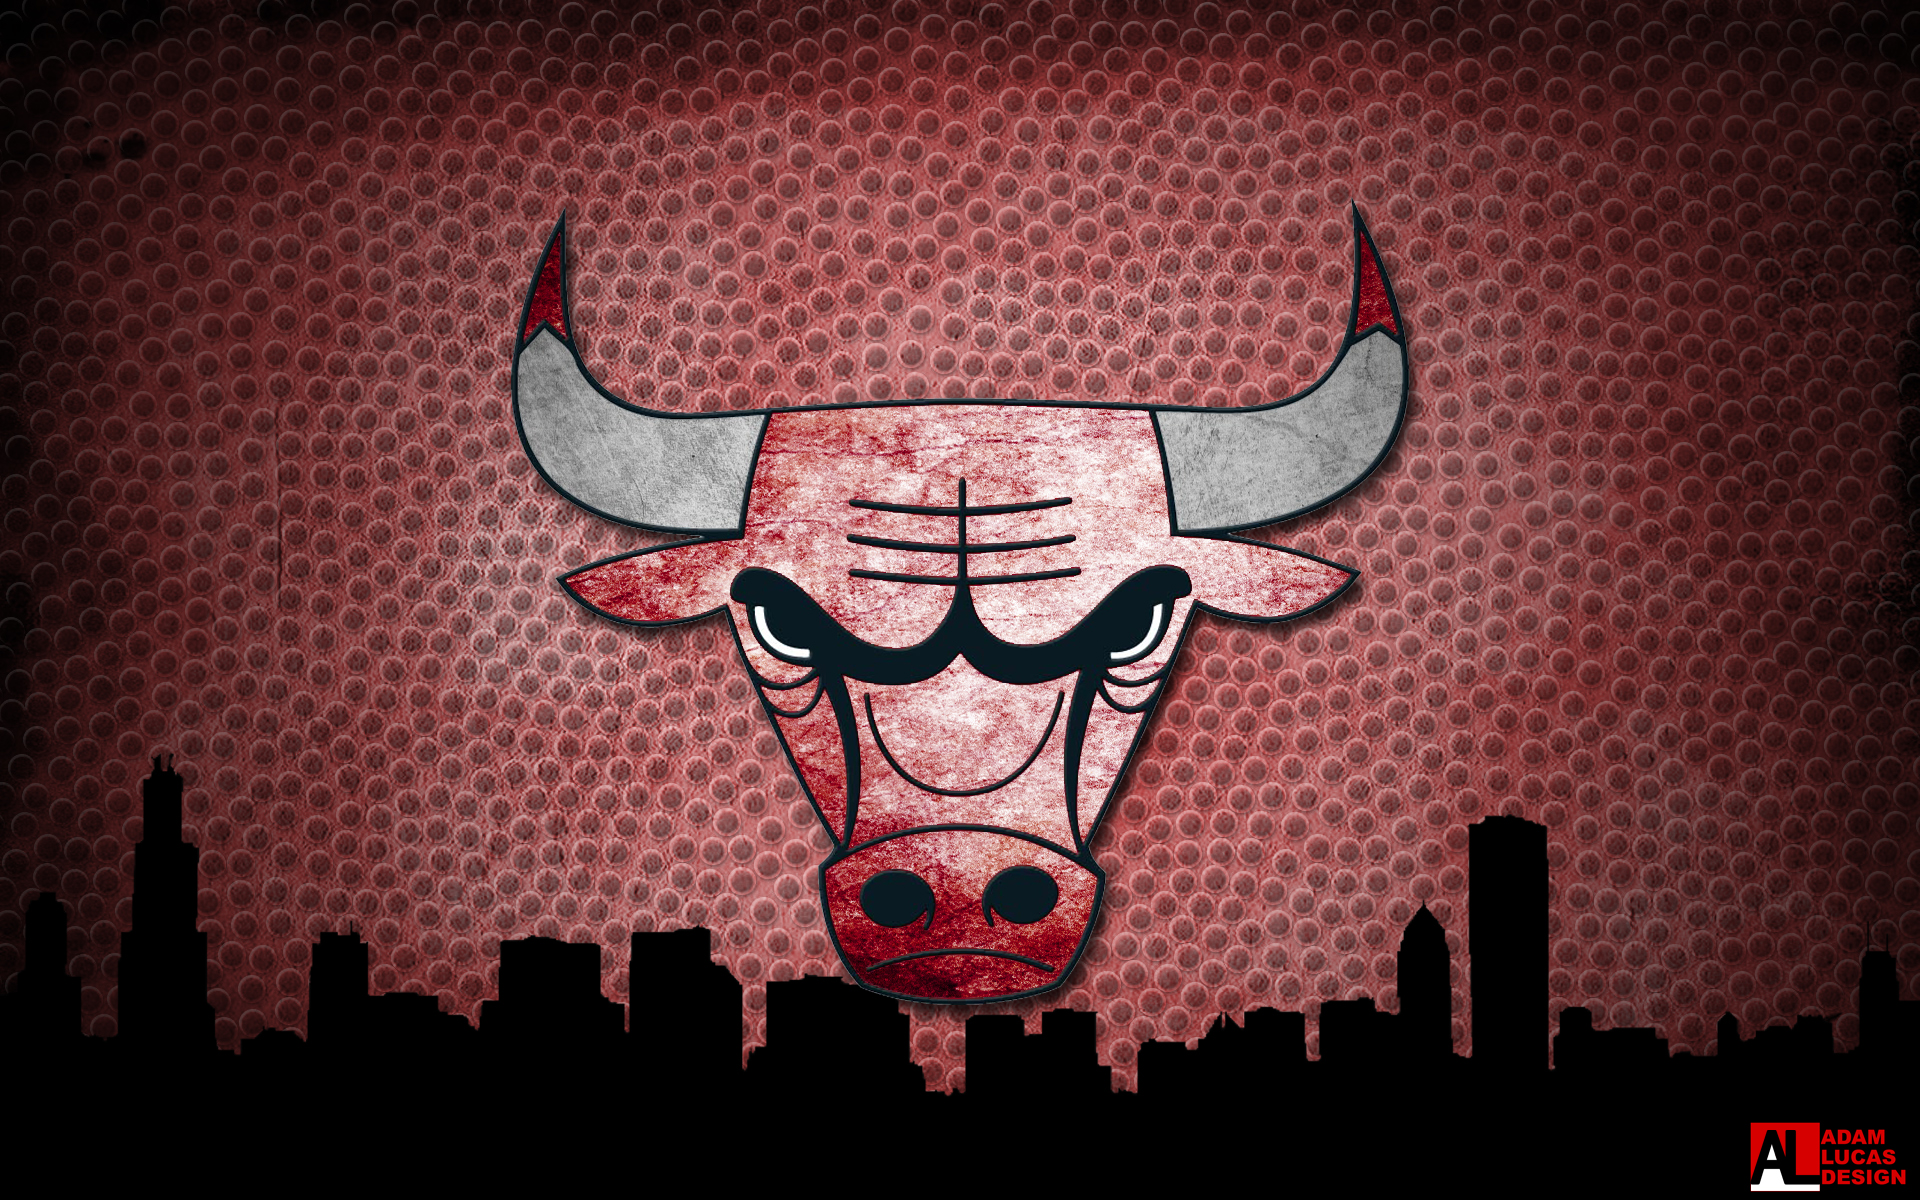 Chicago Bulls Logo Wallpaper 2012 Images amp Pictures   Becuo